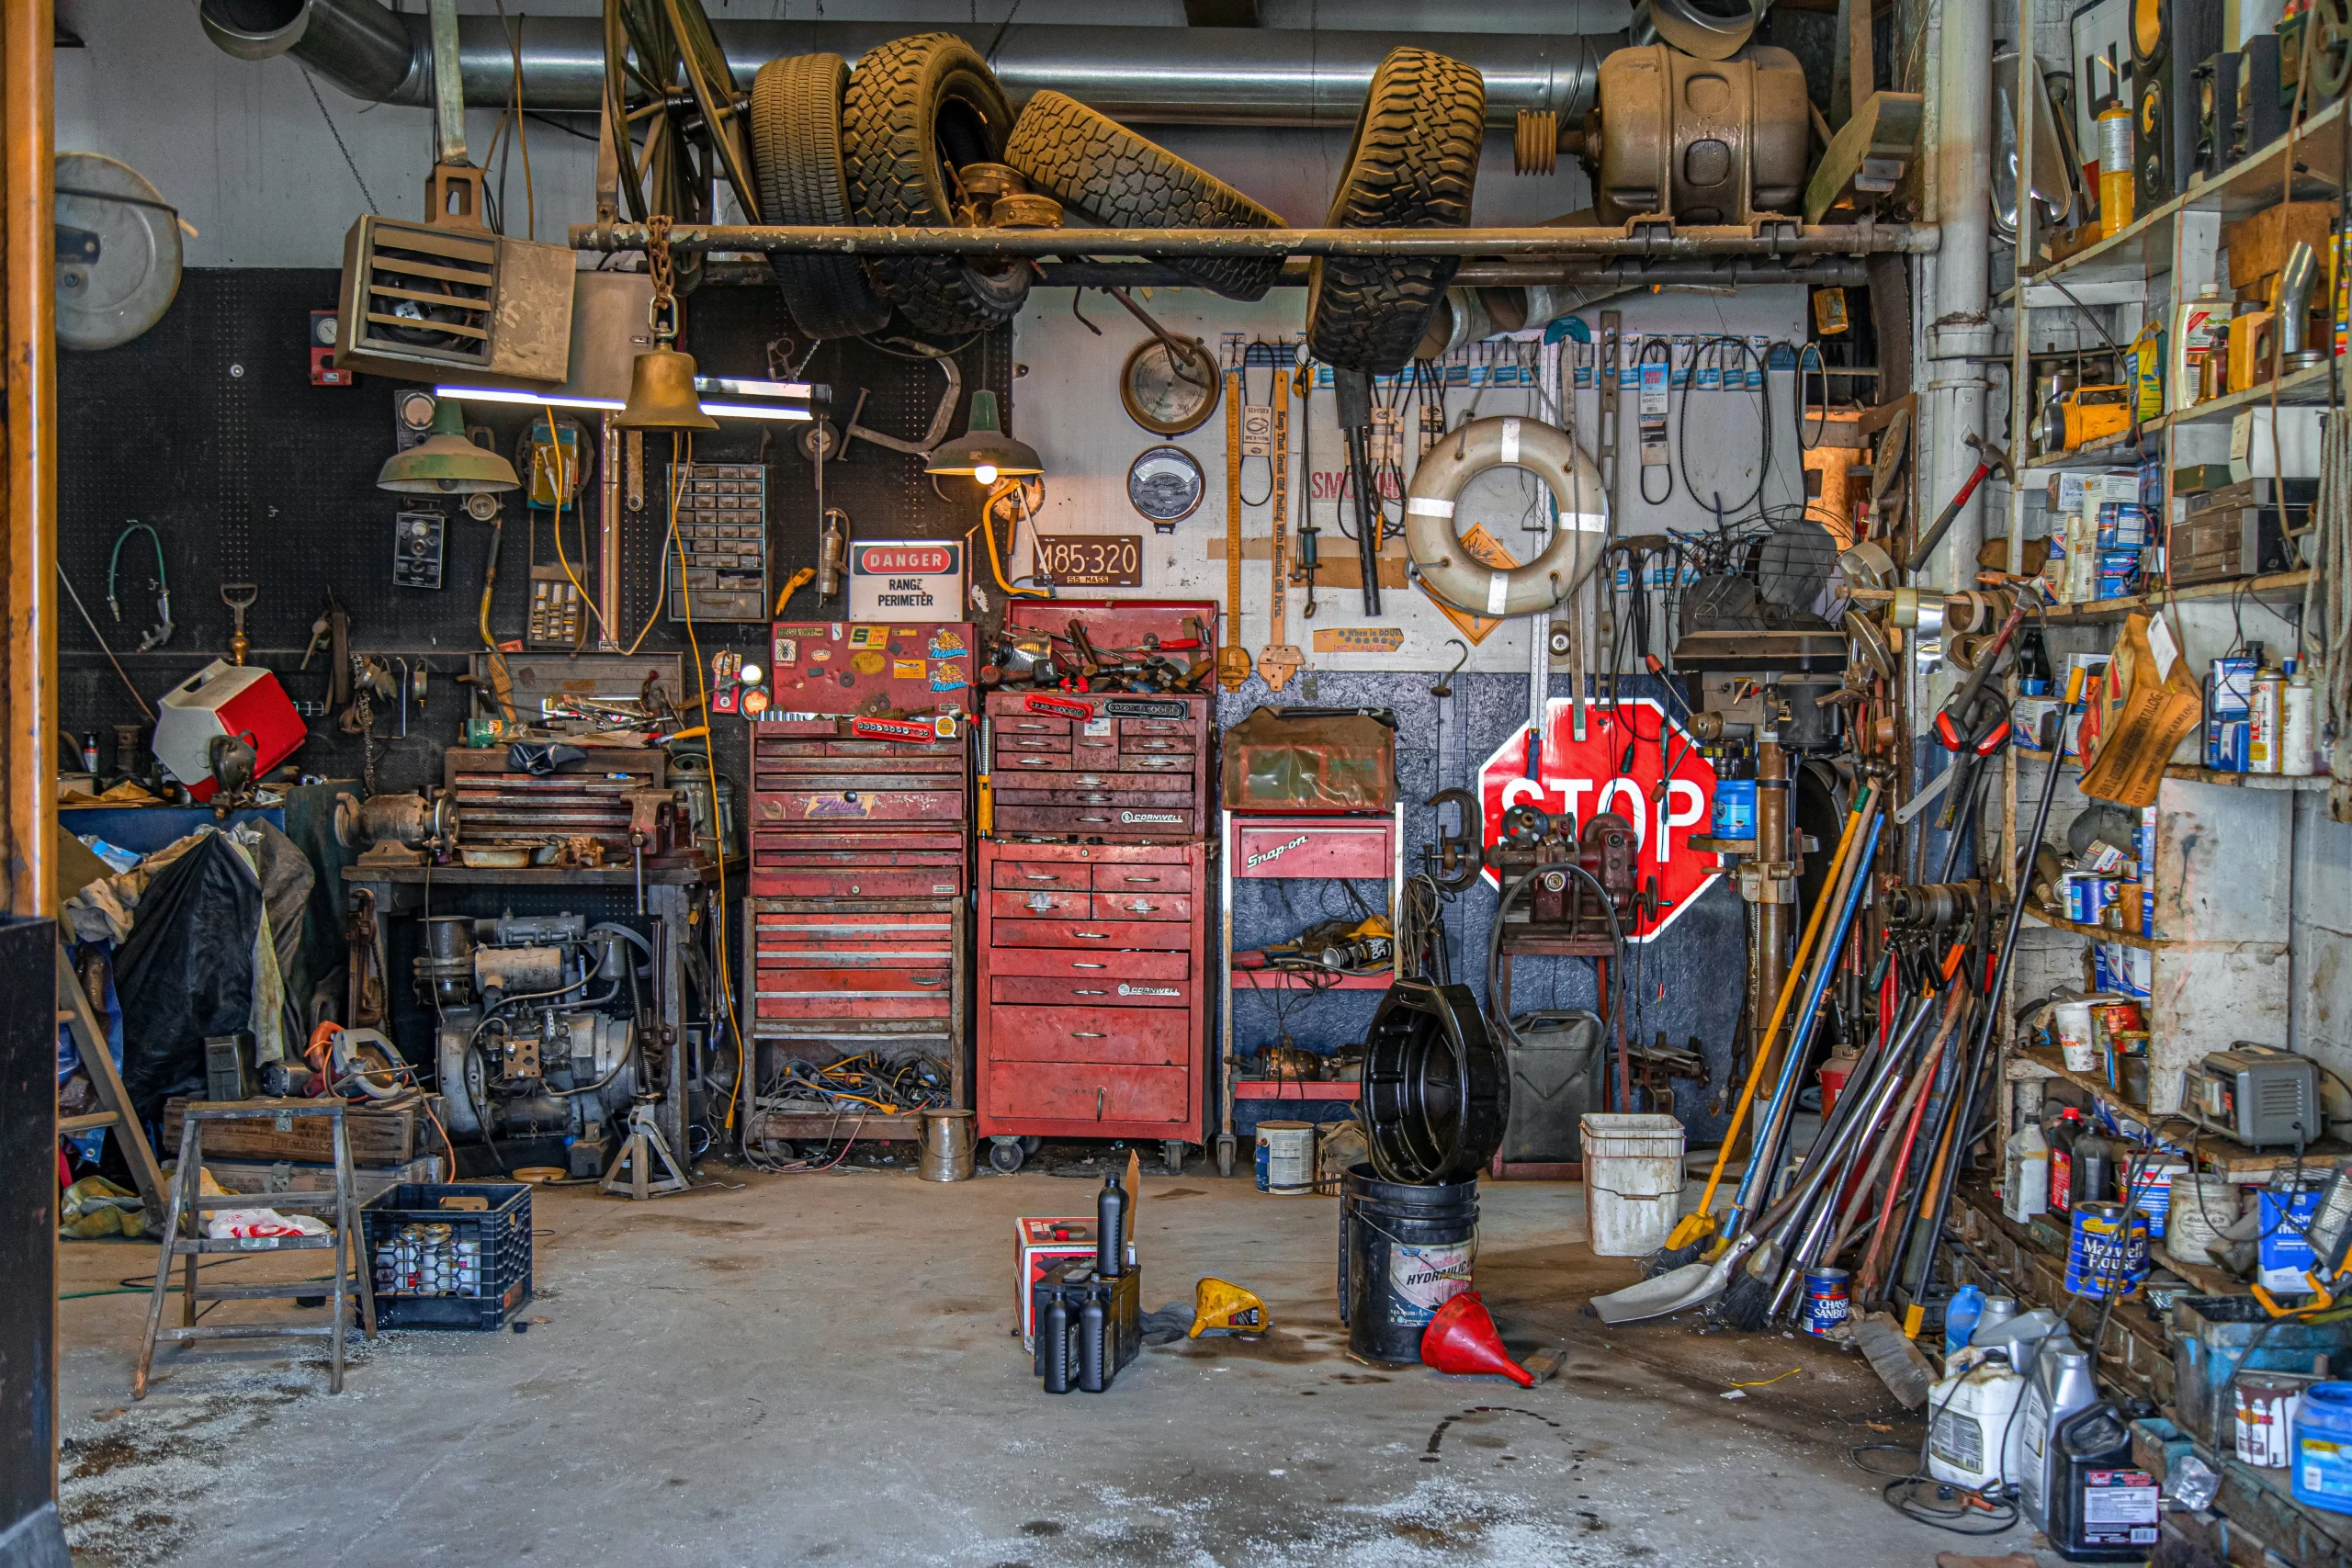 Ultimate Guide: How to Build Garage Storage Shelves and Organize